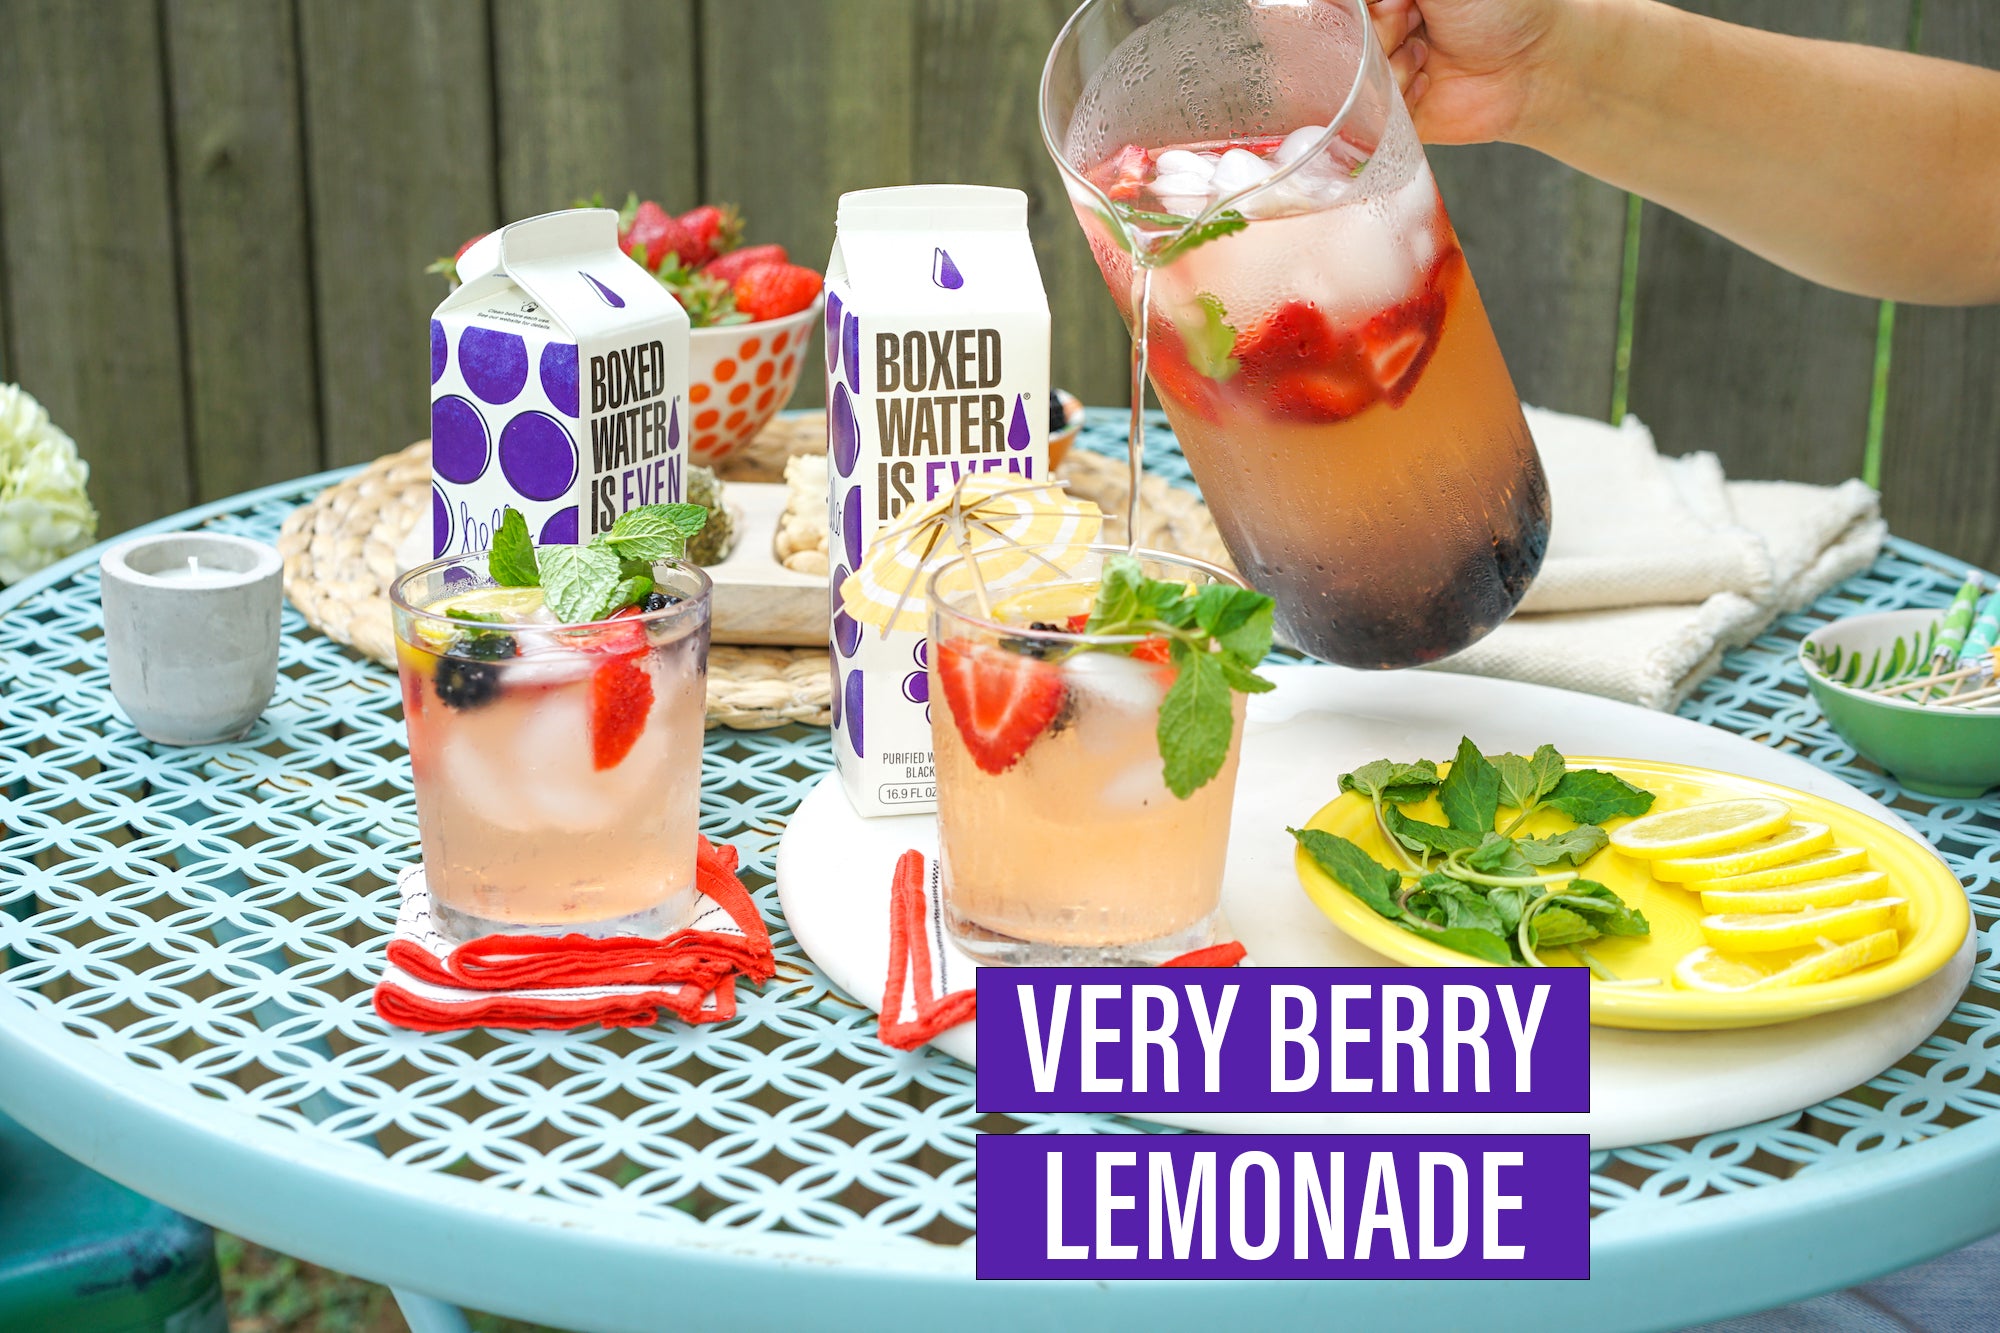 This Blackberry Lemonade Recipe Will Make Your Party One To Remember